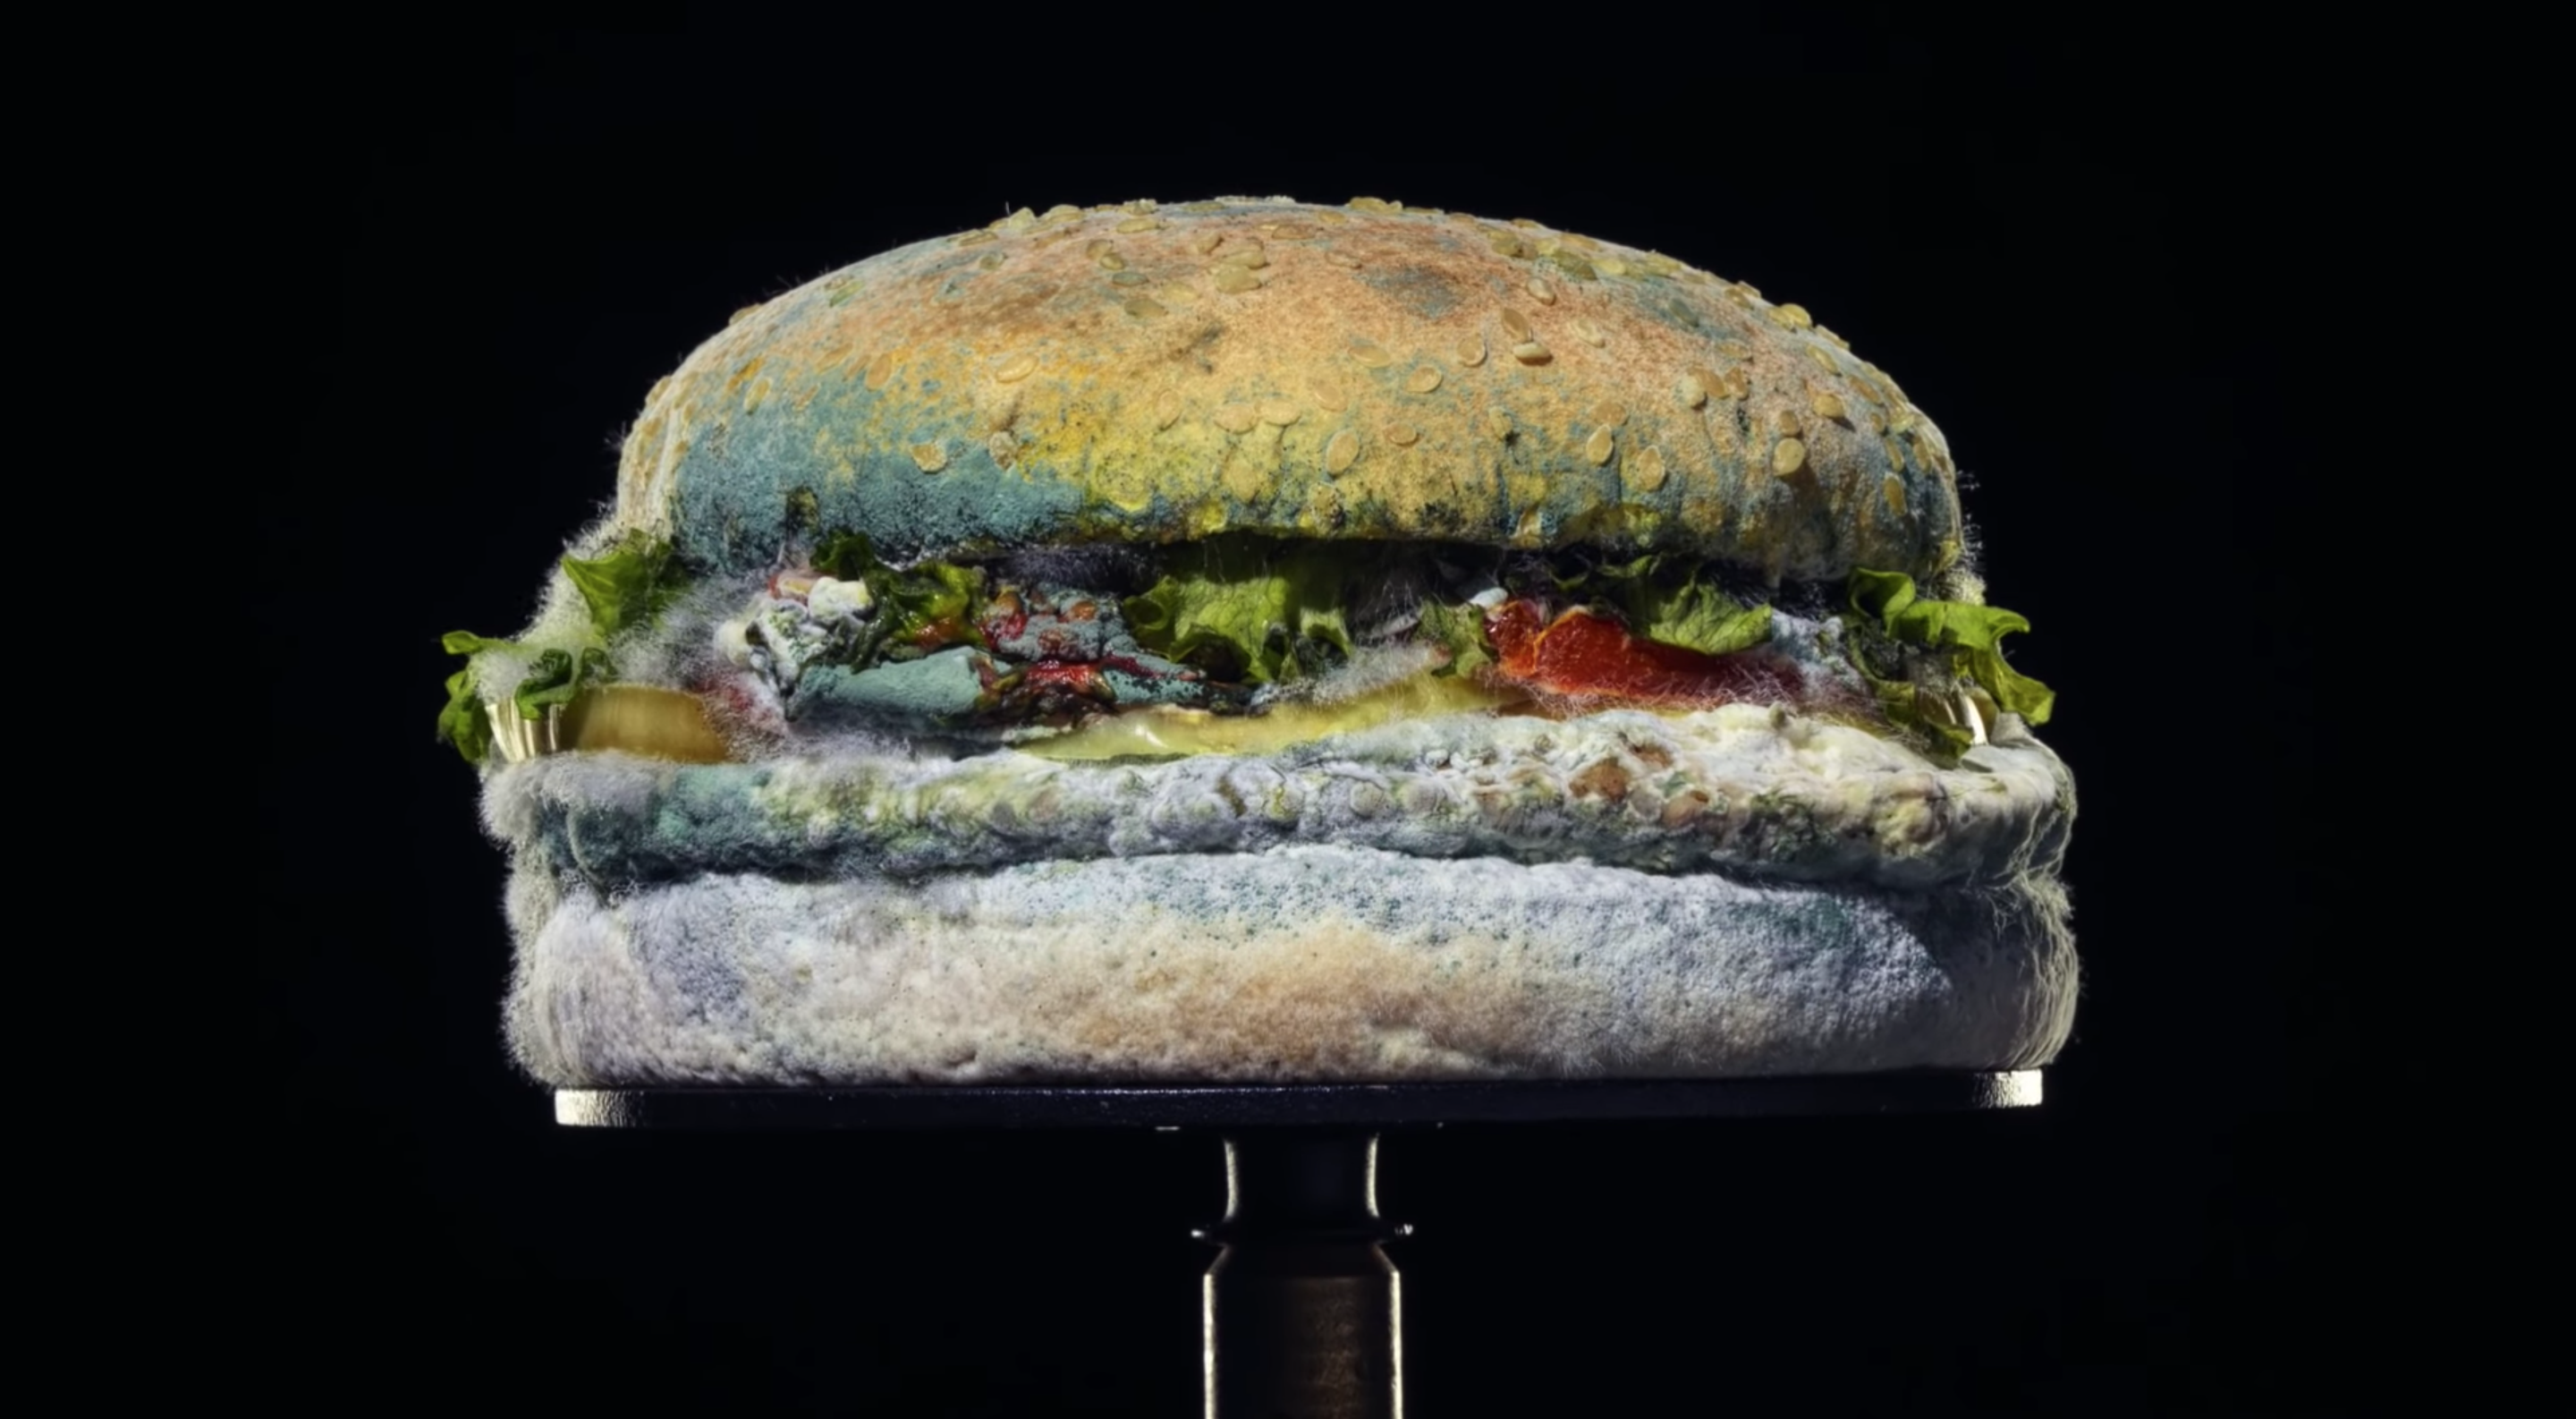 Burger King's new 'Moldy Whopper' ad is turning heads and churning stomachs  – Deseret News